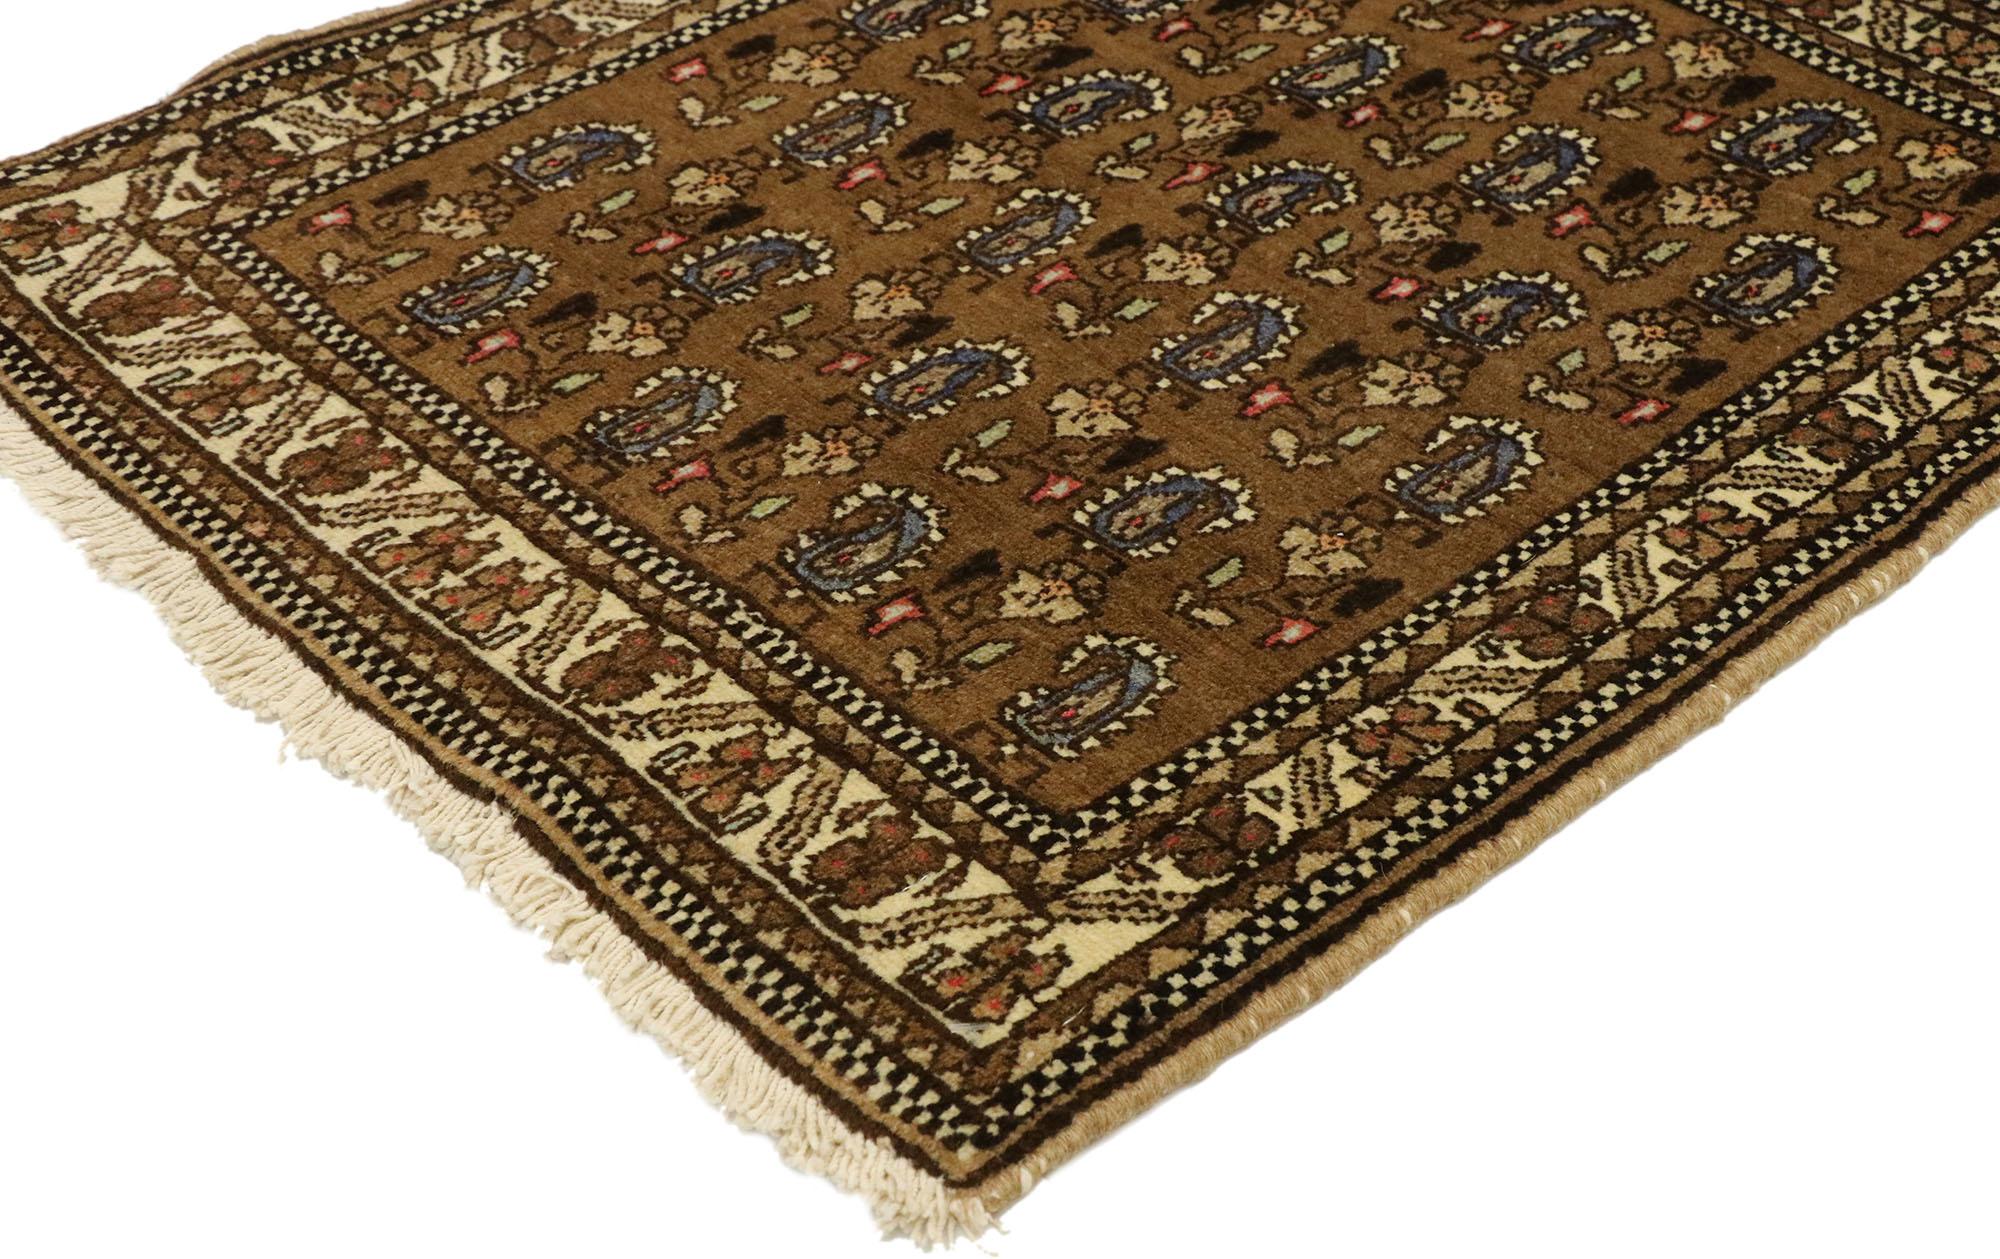 75168, vintage Persian Mashhad Scatter rug with Mid-Century Modern style. With timeless appeal and Mid-Century Modern style, this hand knotted wool vintage Persian Mashhad scatter rug can beautifully blend traditional, modern, and contemporary